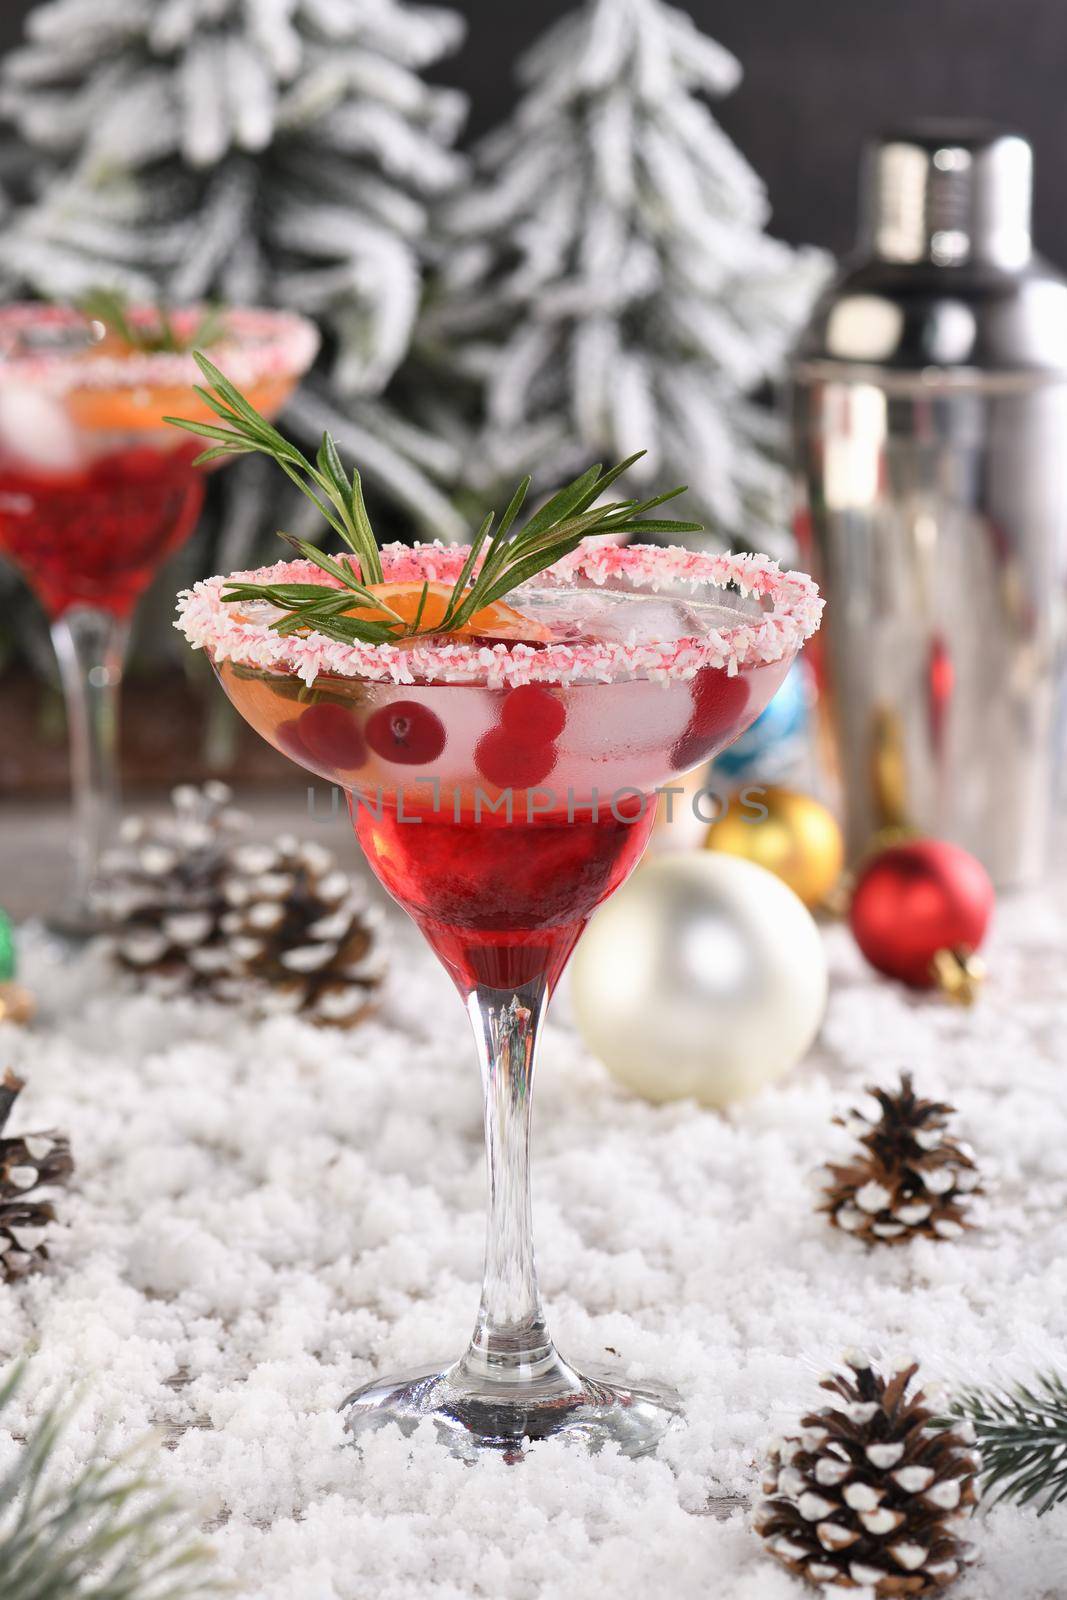  Christmas Cranberry margarita cocktail by Apolonia